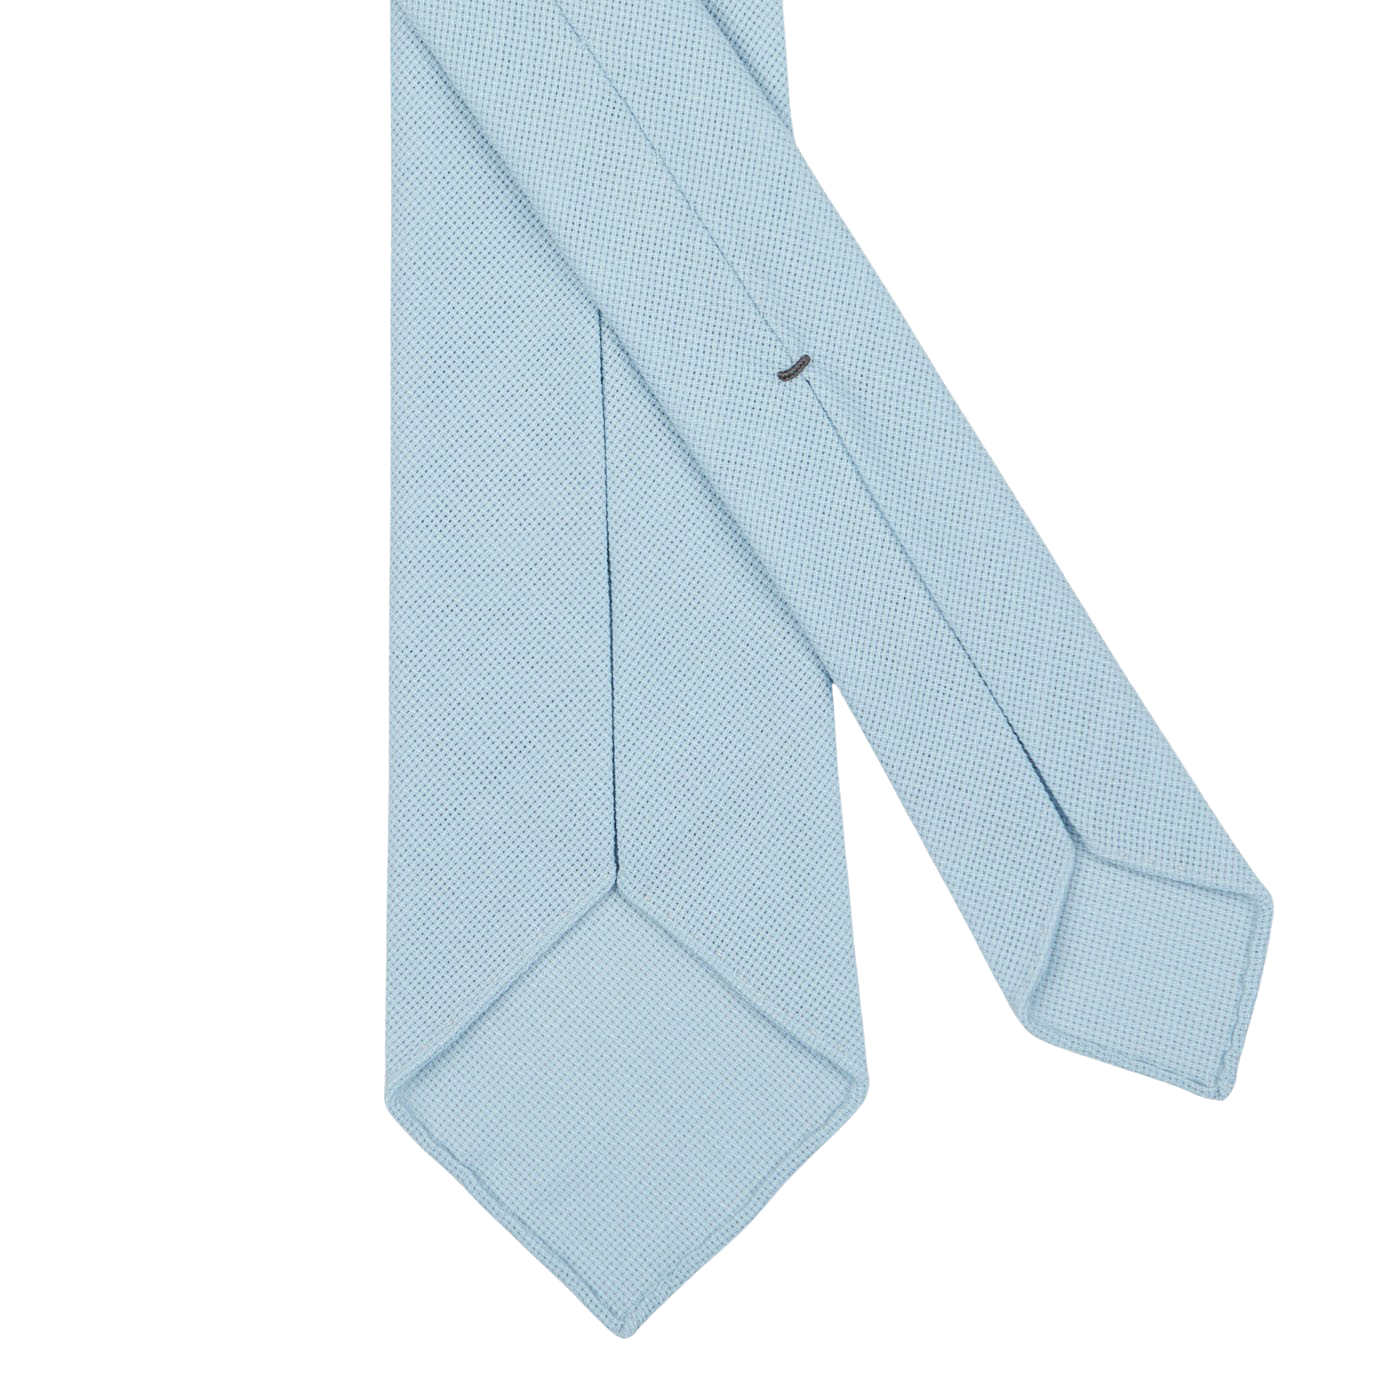 A Sky Blue 7-Fold Wool Hopsack Tie by Dreaming Of Monday is laid out flat on a white background.